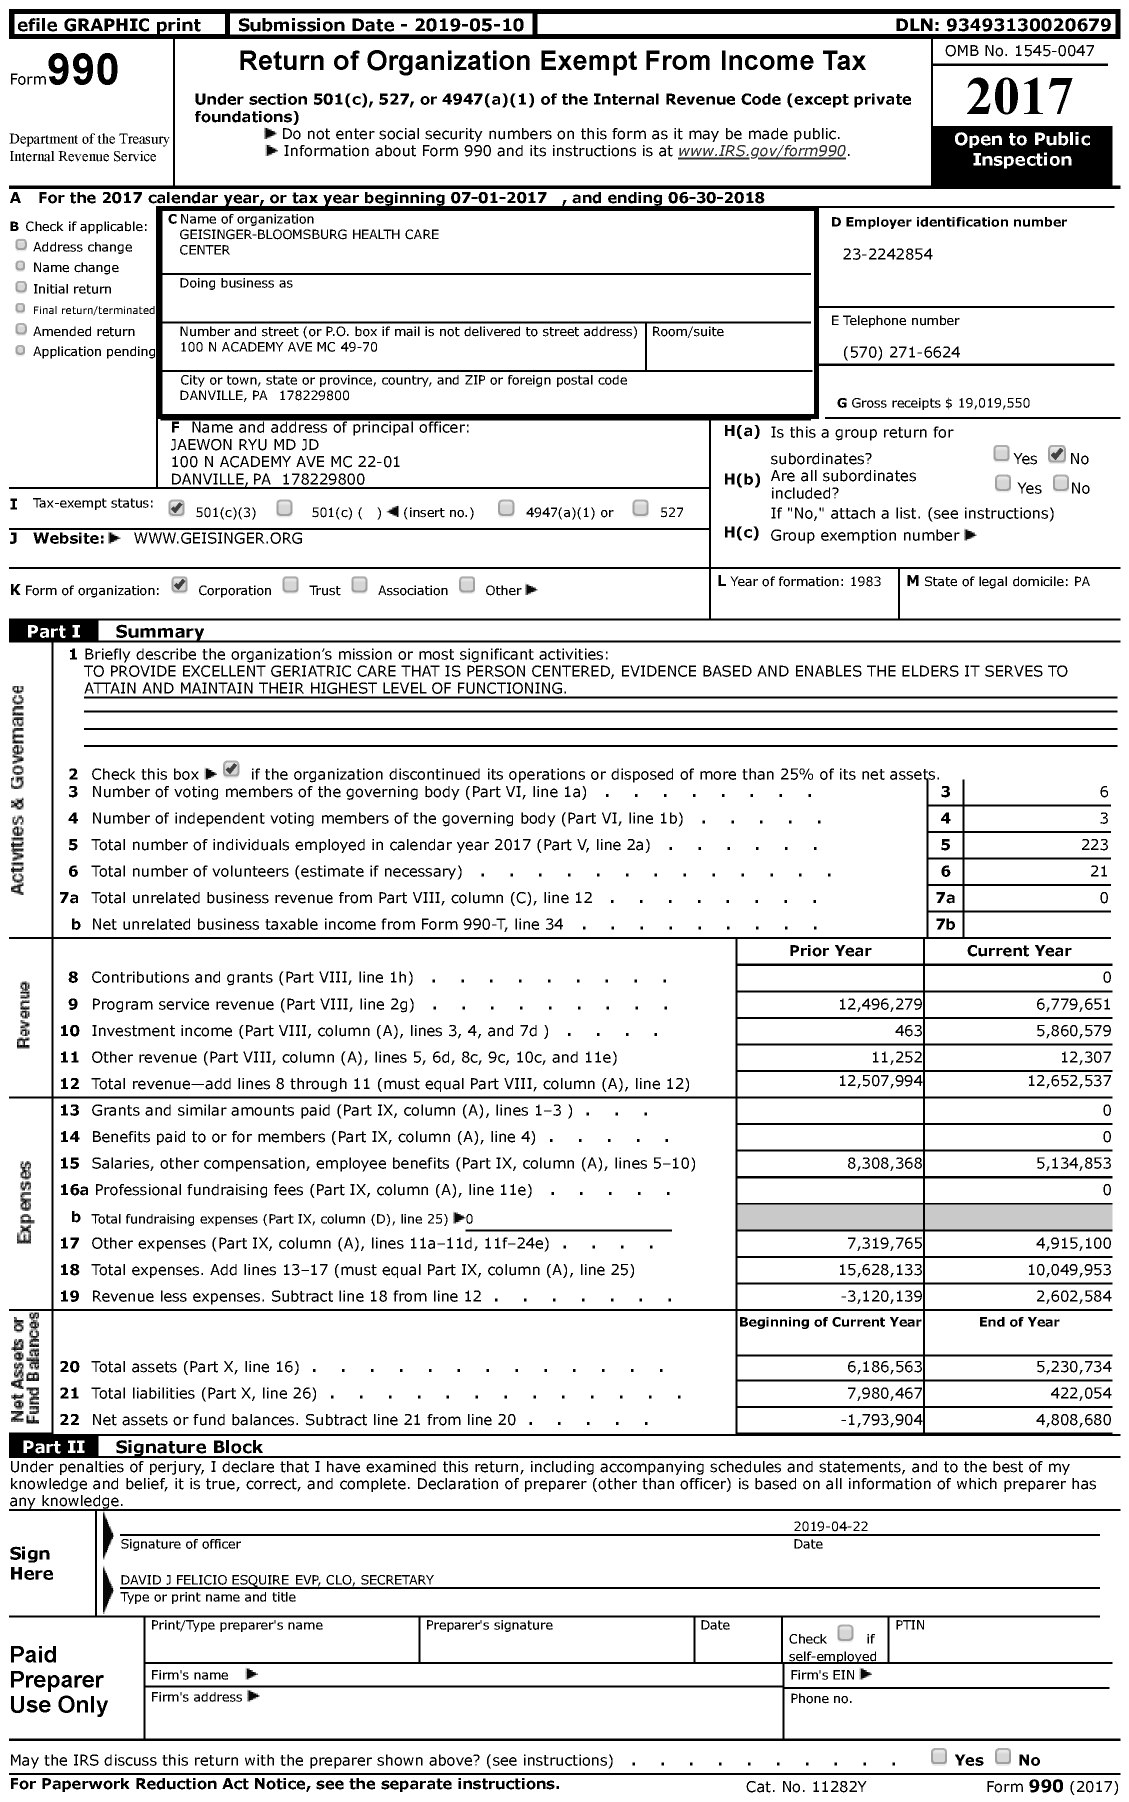 Image of first page of 2017 Form 990 for Geisinger-Bloomsburg Health Care Center (GHS)